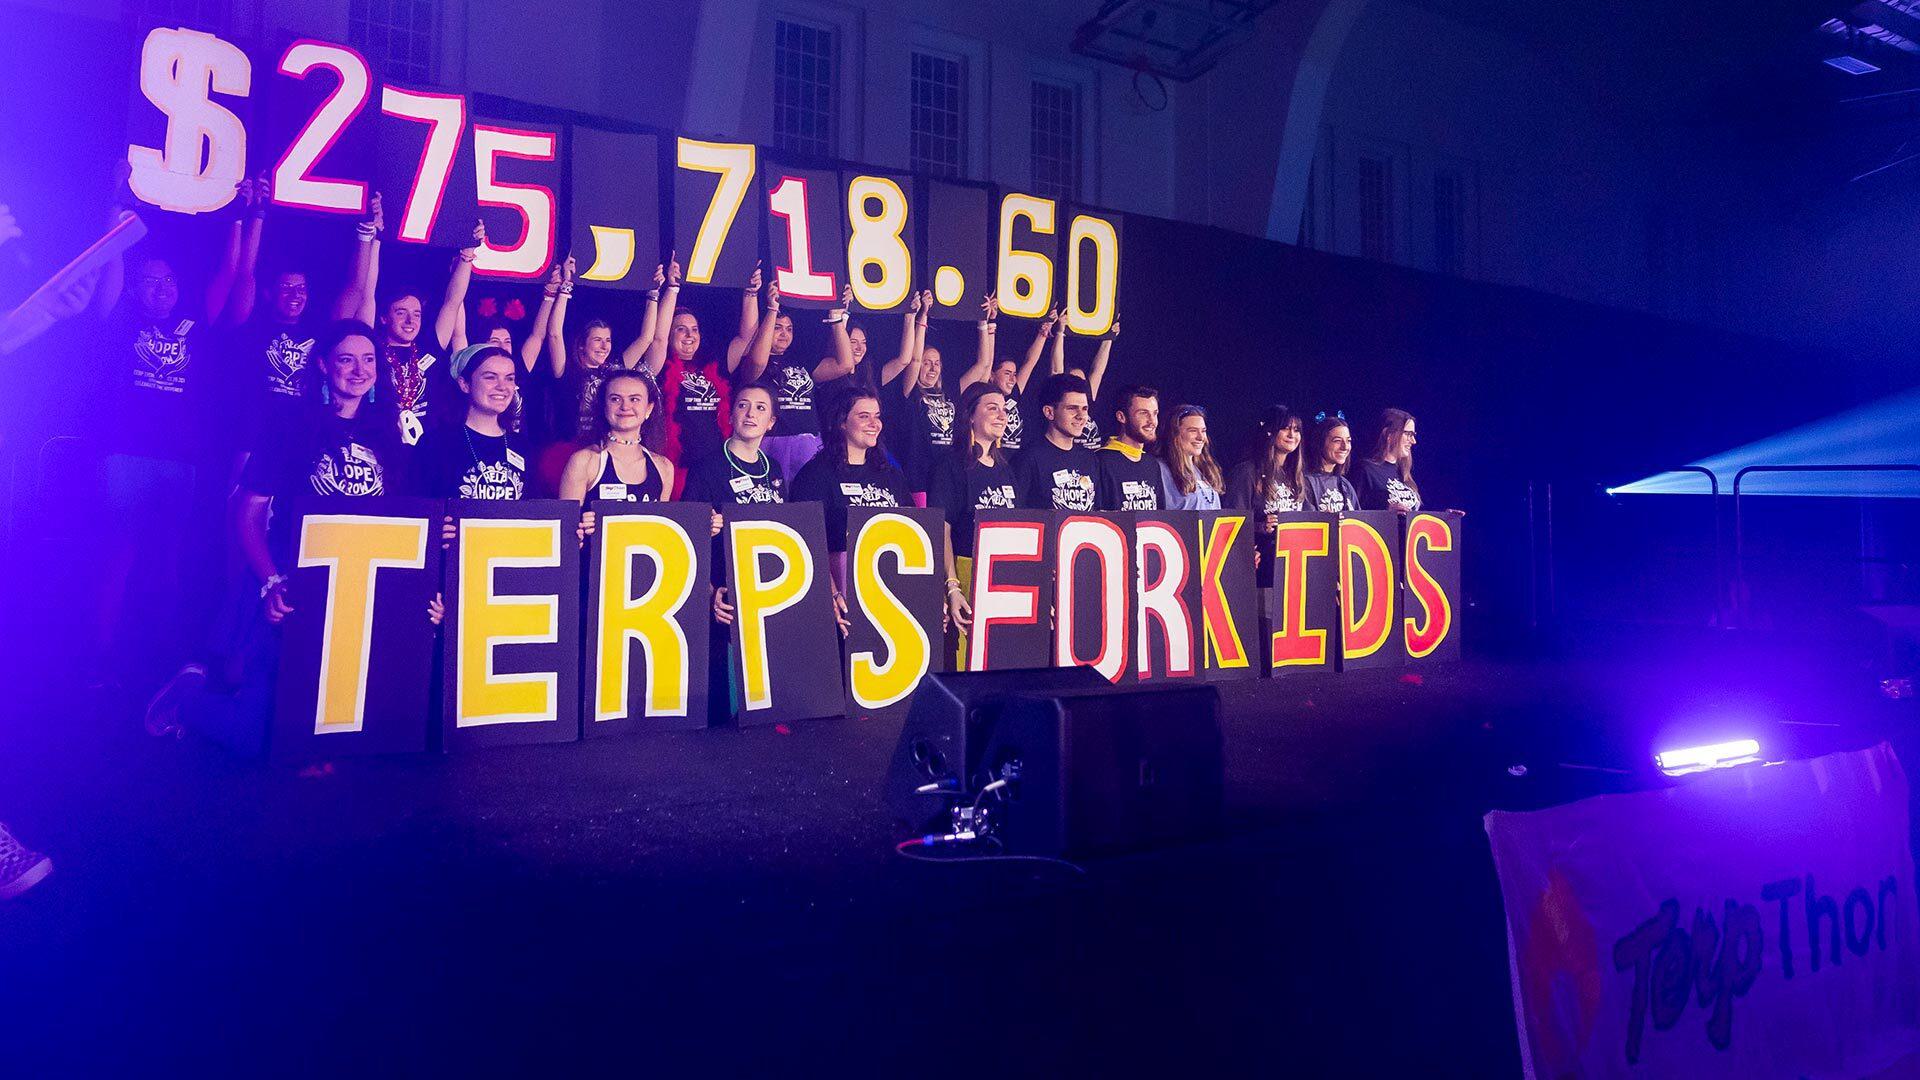 multiple folks hold up a big number and world "terps for kids" on a stage